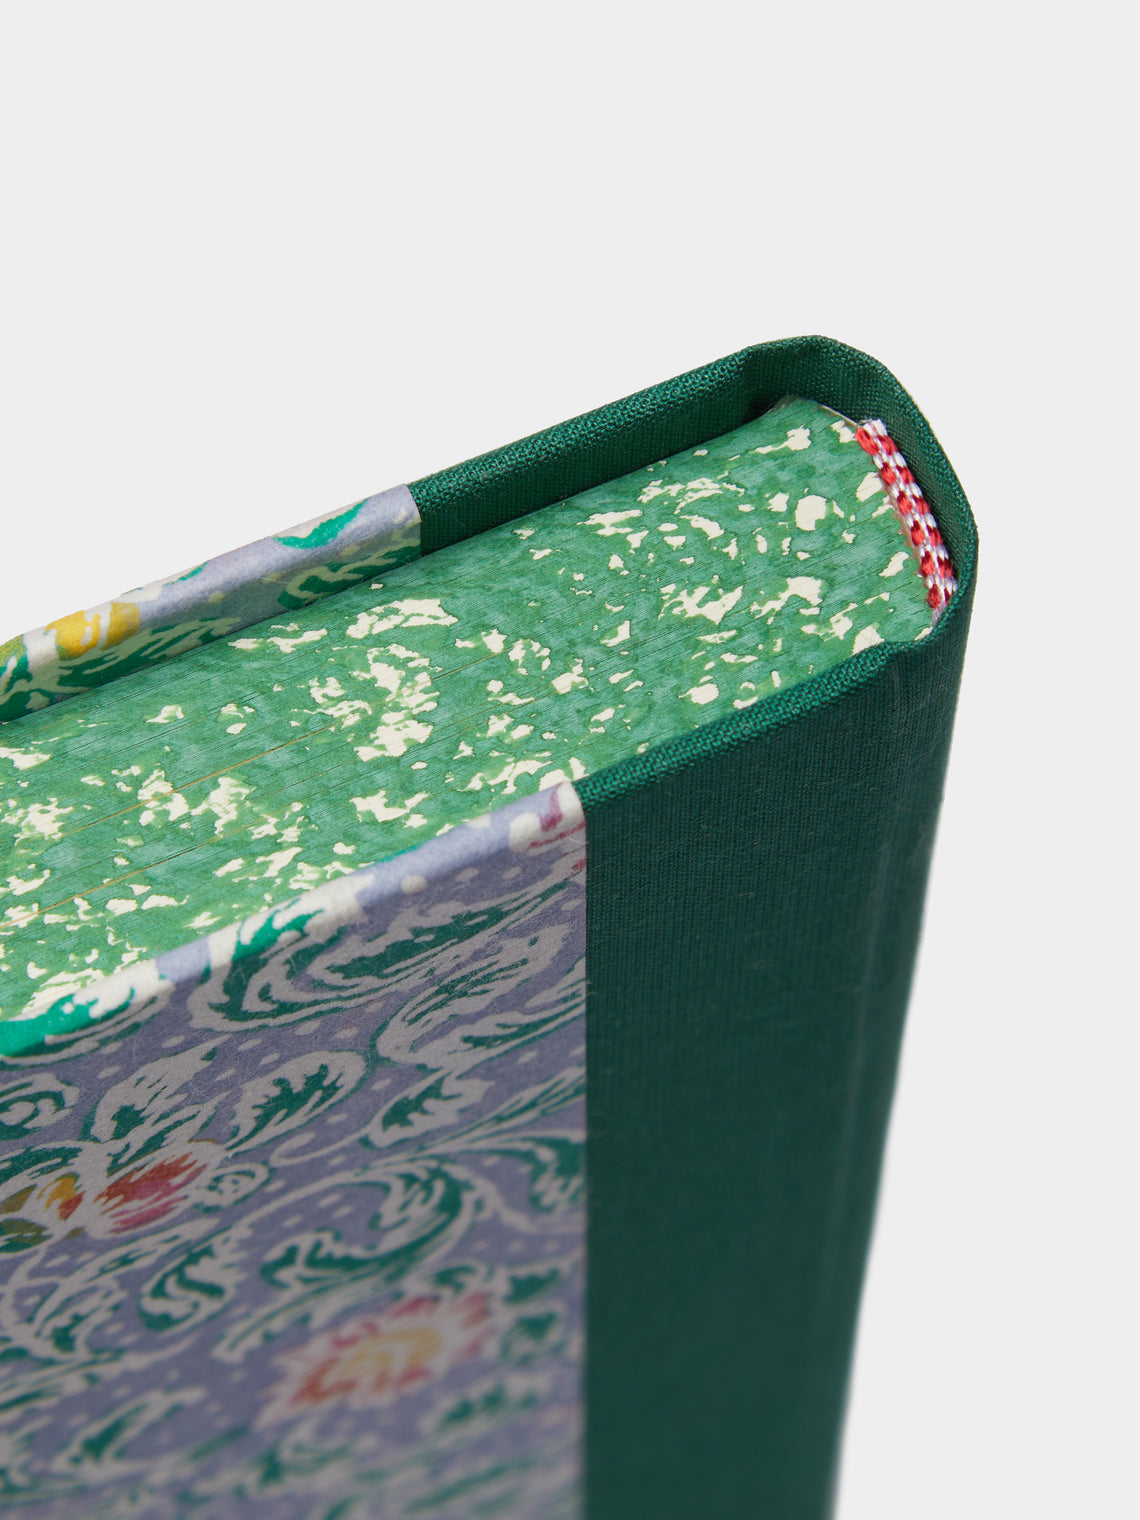 Choosing Keeping - Composition Ledger Extra Thick Notebook - Green - ABASK